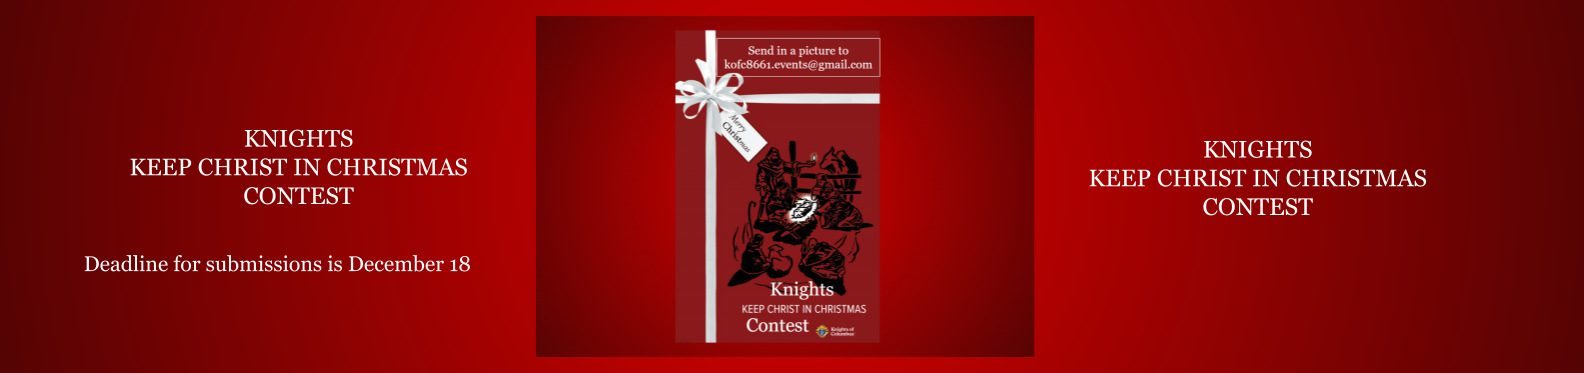 Keep Christ in Christmas Contest